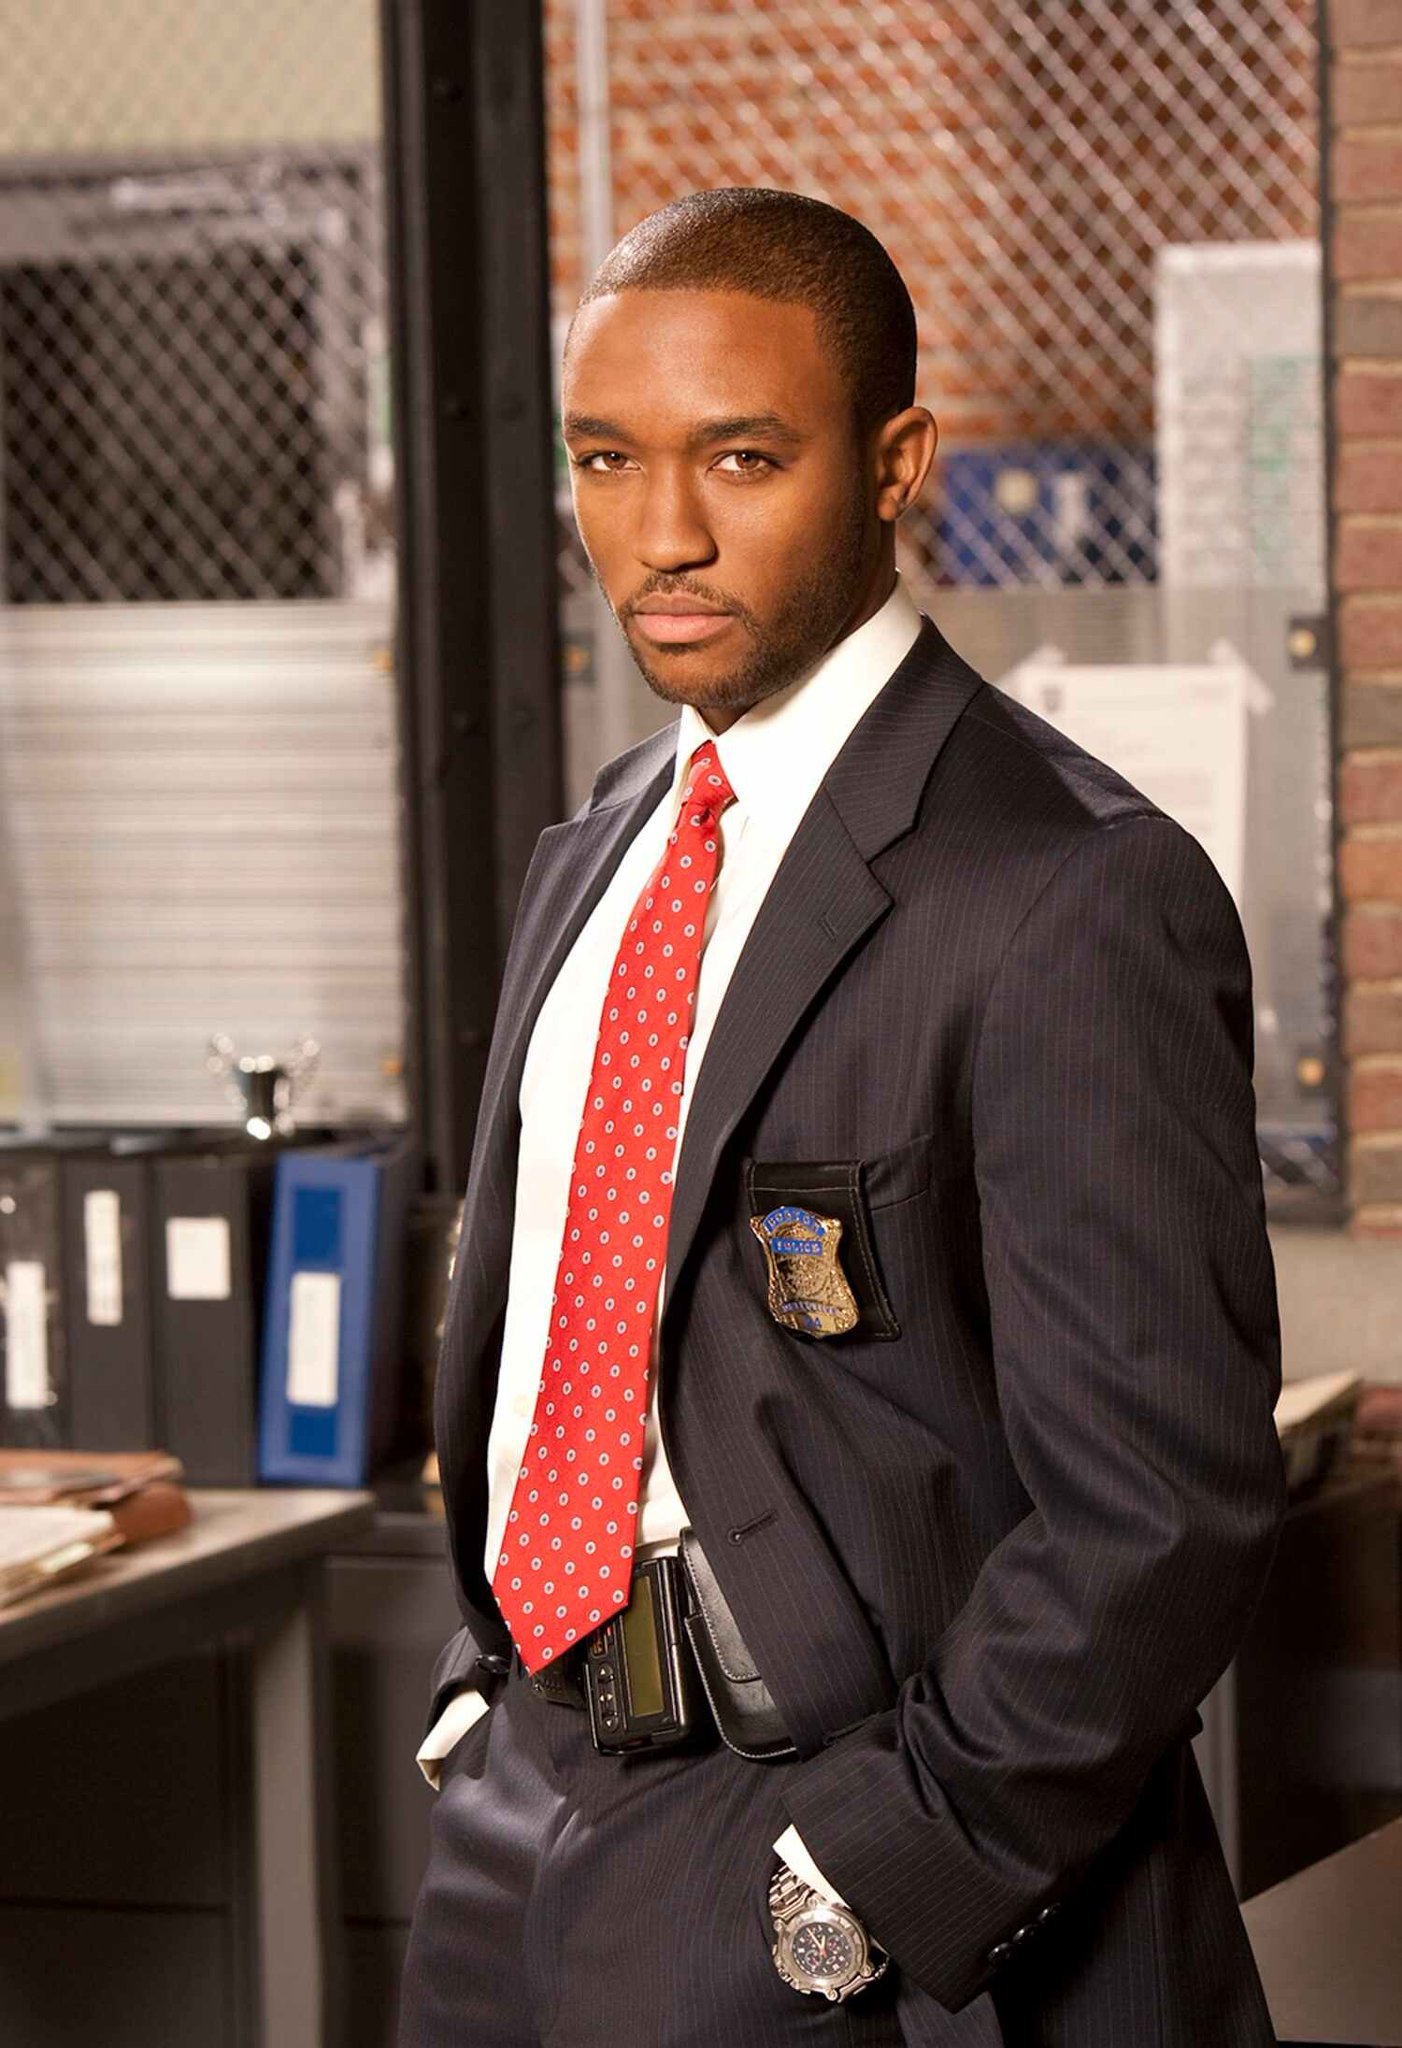 Happy birthday up there Lee Thompson Young. Still miss you 